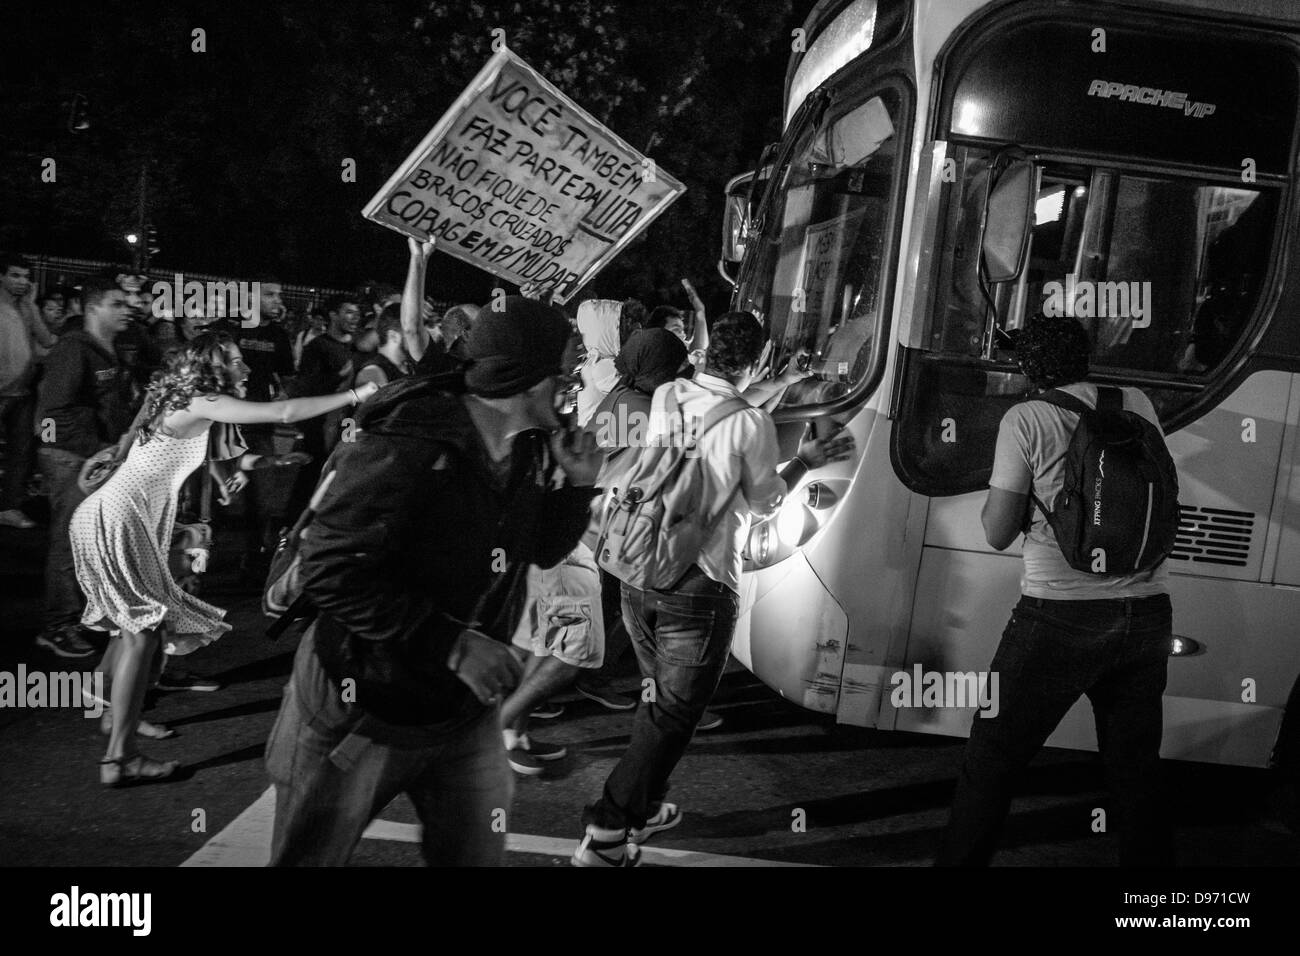 Youth during manifesto against increased bus fare in Rio de Janeiro (10/06/13) Stock Photo